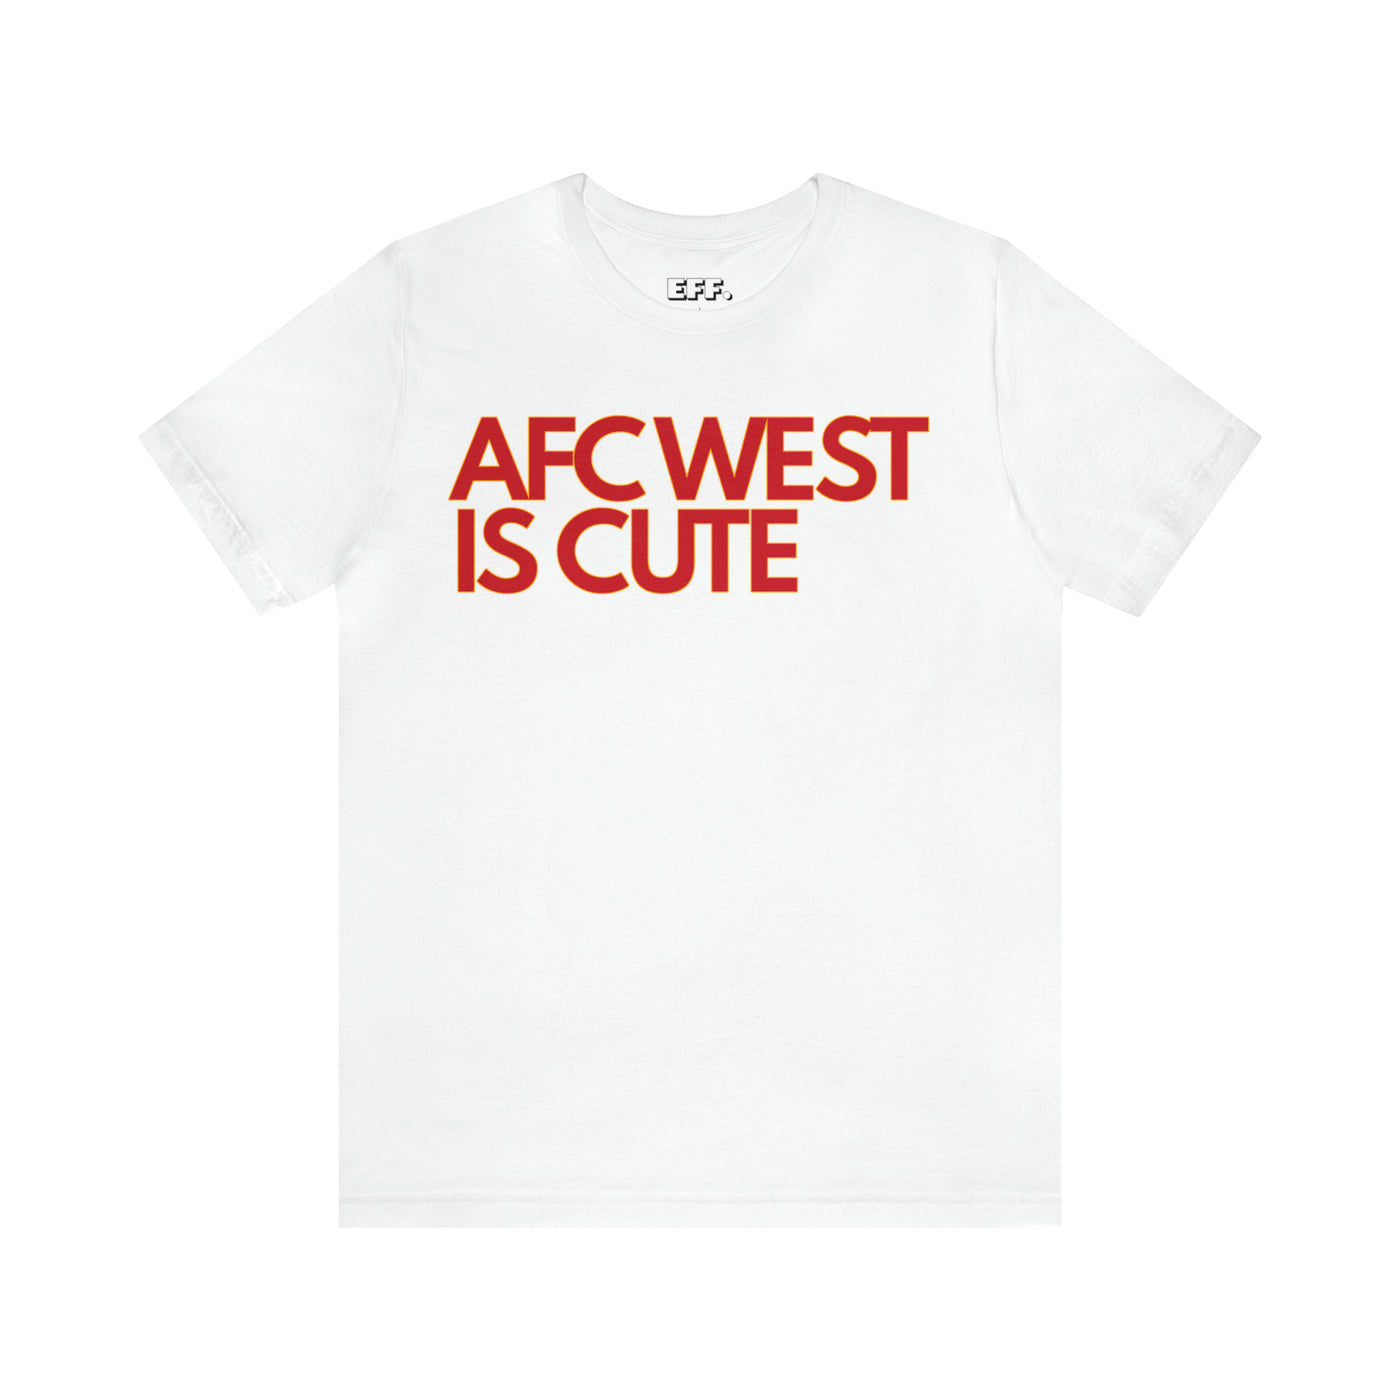 AFC West is Cute